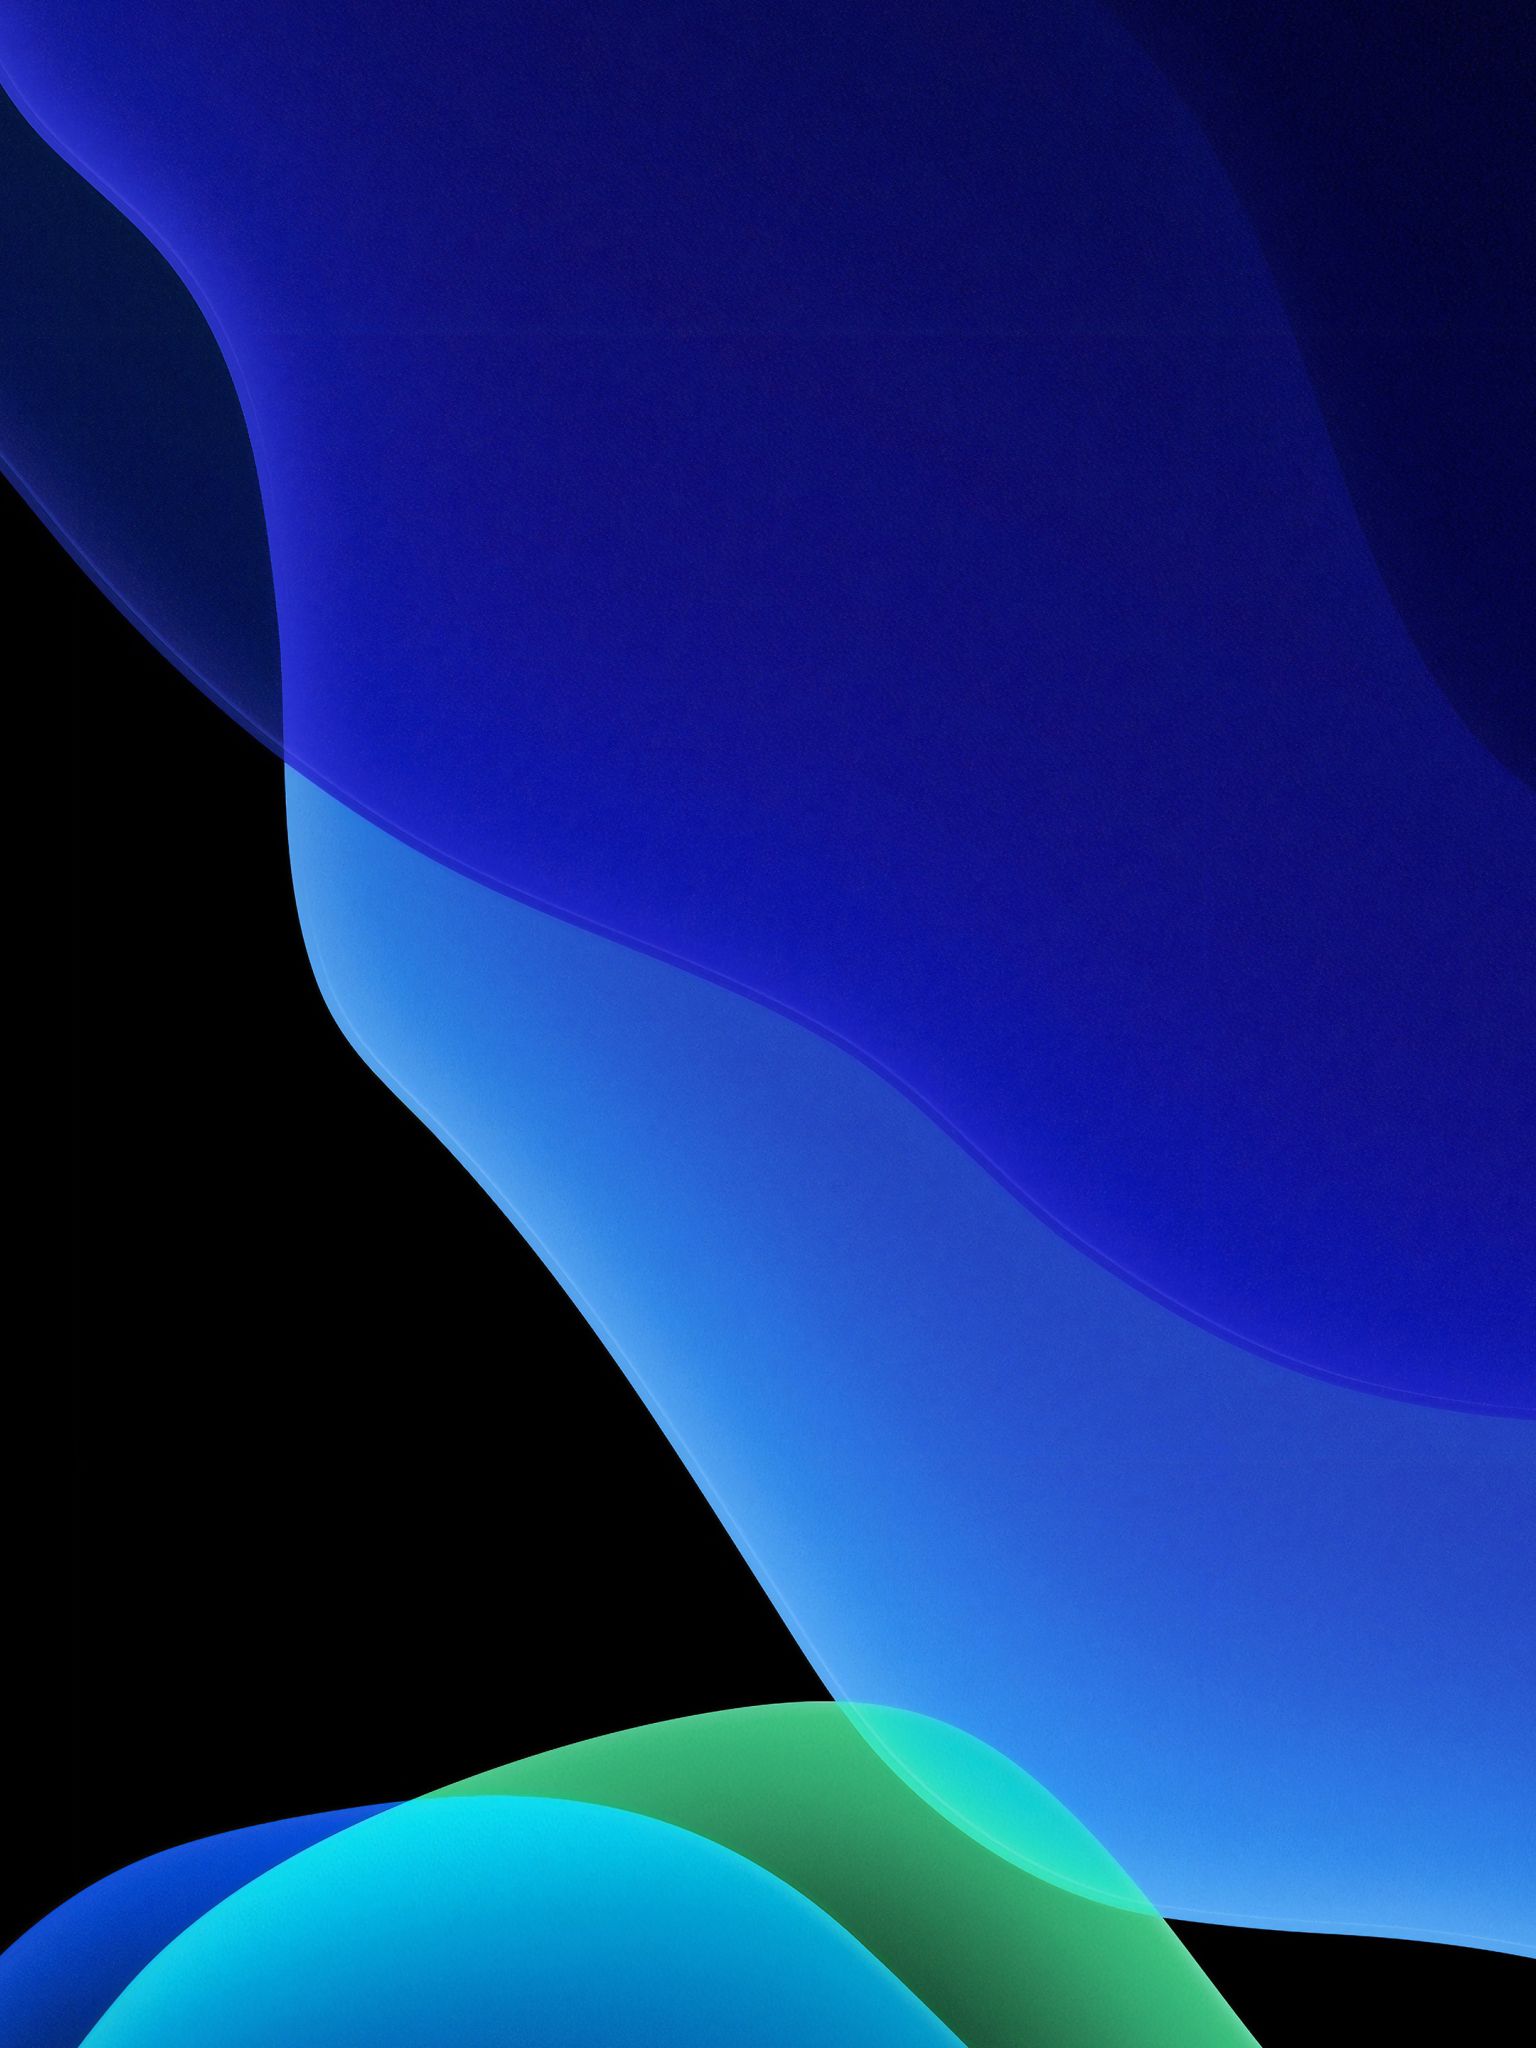 Dark Blue iOS 13 Apple 1536x2048 Resolution Wallpaper, HD Abstract 4K Wallpaper, Image, Photo and Background